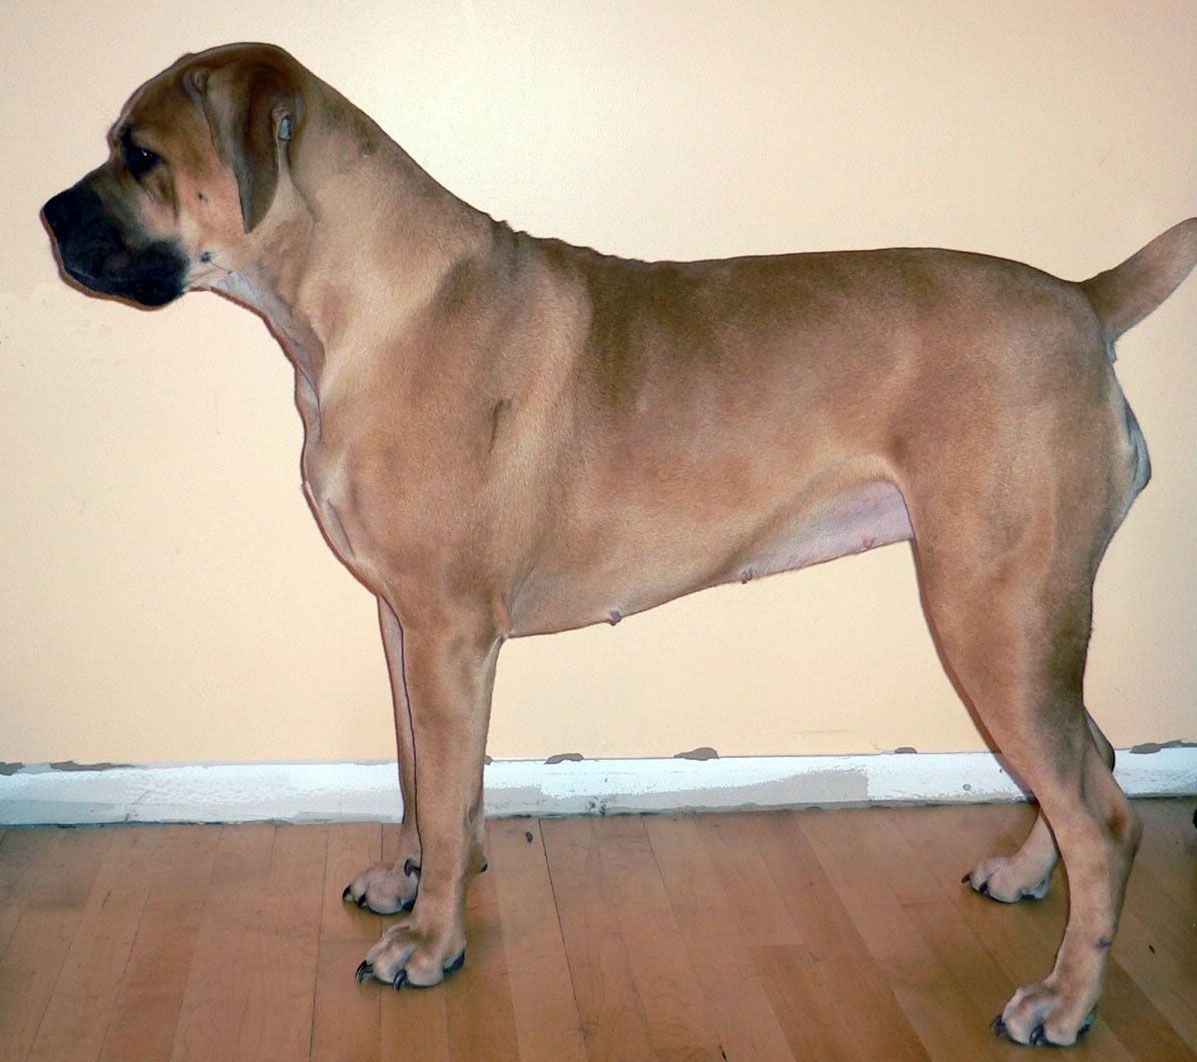 Boerboel photo and wallpaper. The beautiful Boerboel picture